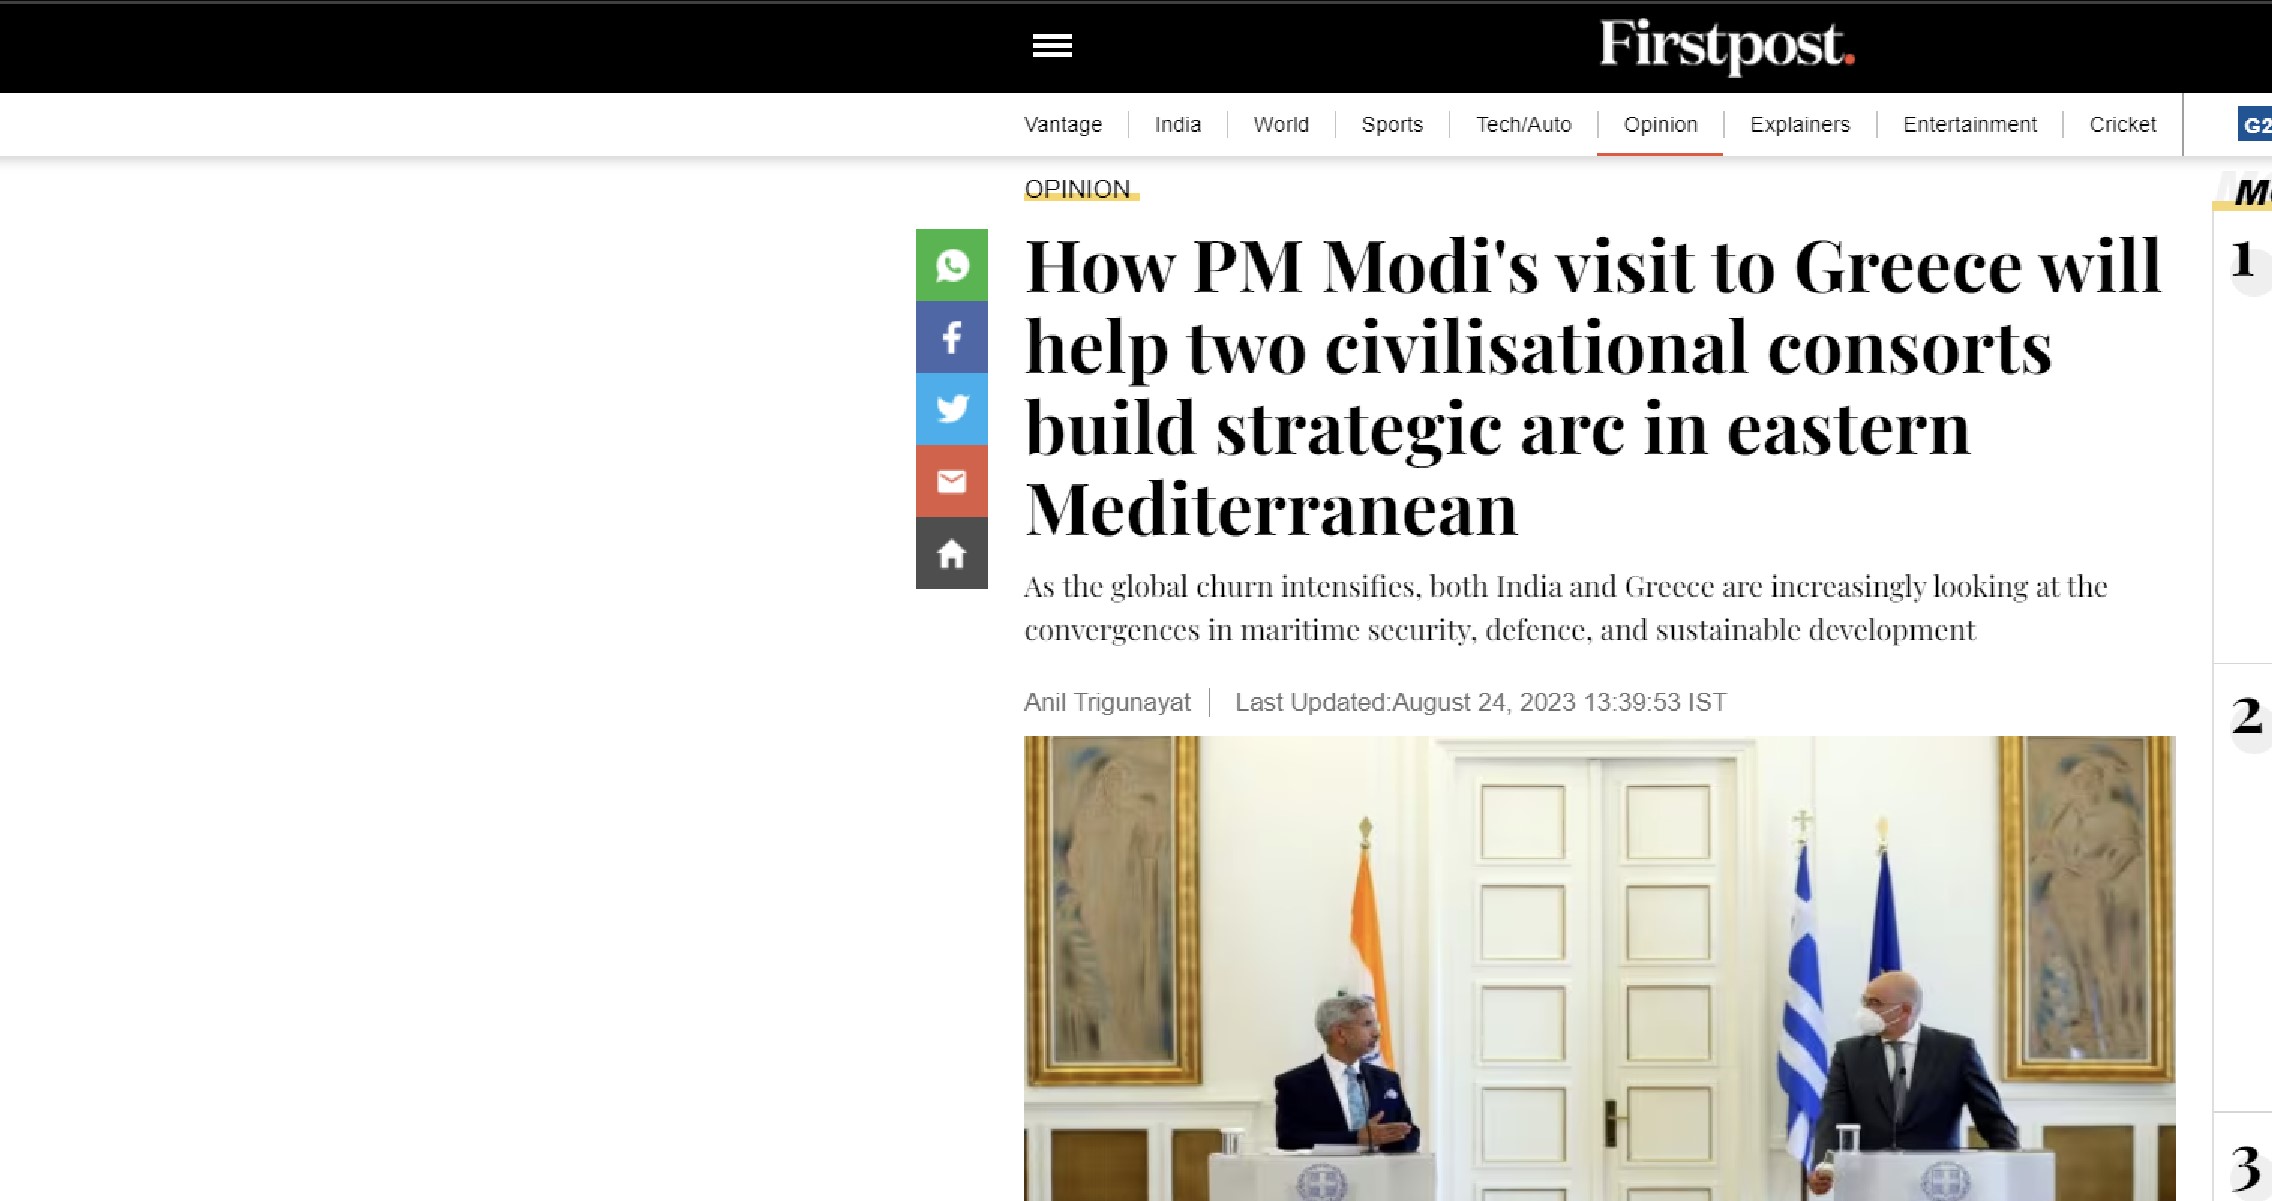 First Post: How PM Modi’s visit to Greece will help two civilisational consorts build strategic arc in eastern Mediterranean